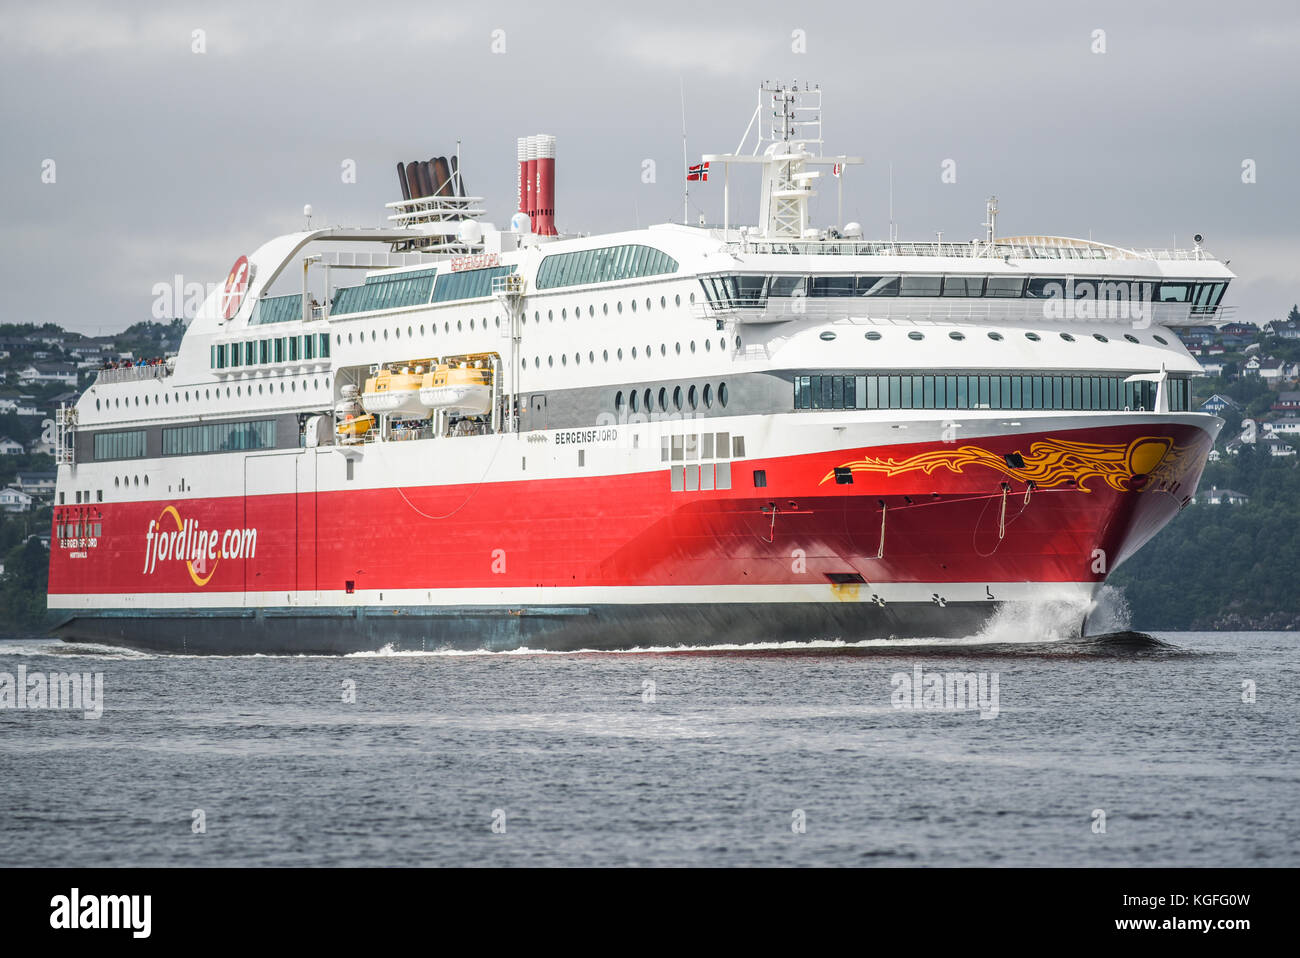 Bergen, Norway, 24 July 2017:Cruise ferry in Norway fjord in fjords. Stock Photo